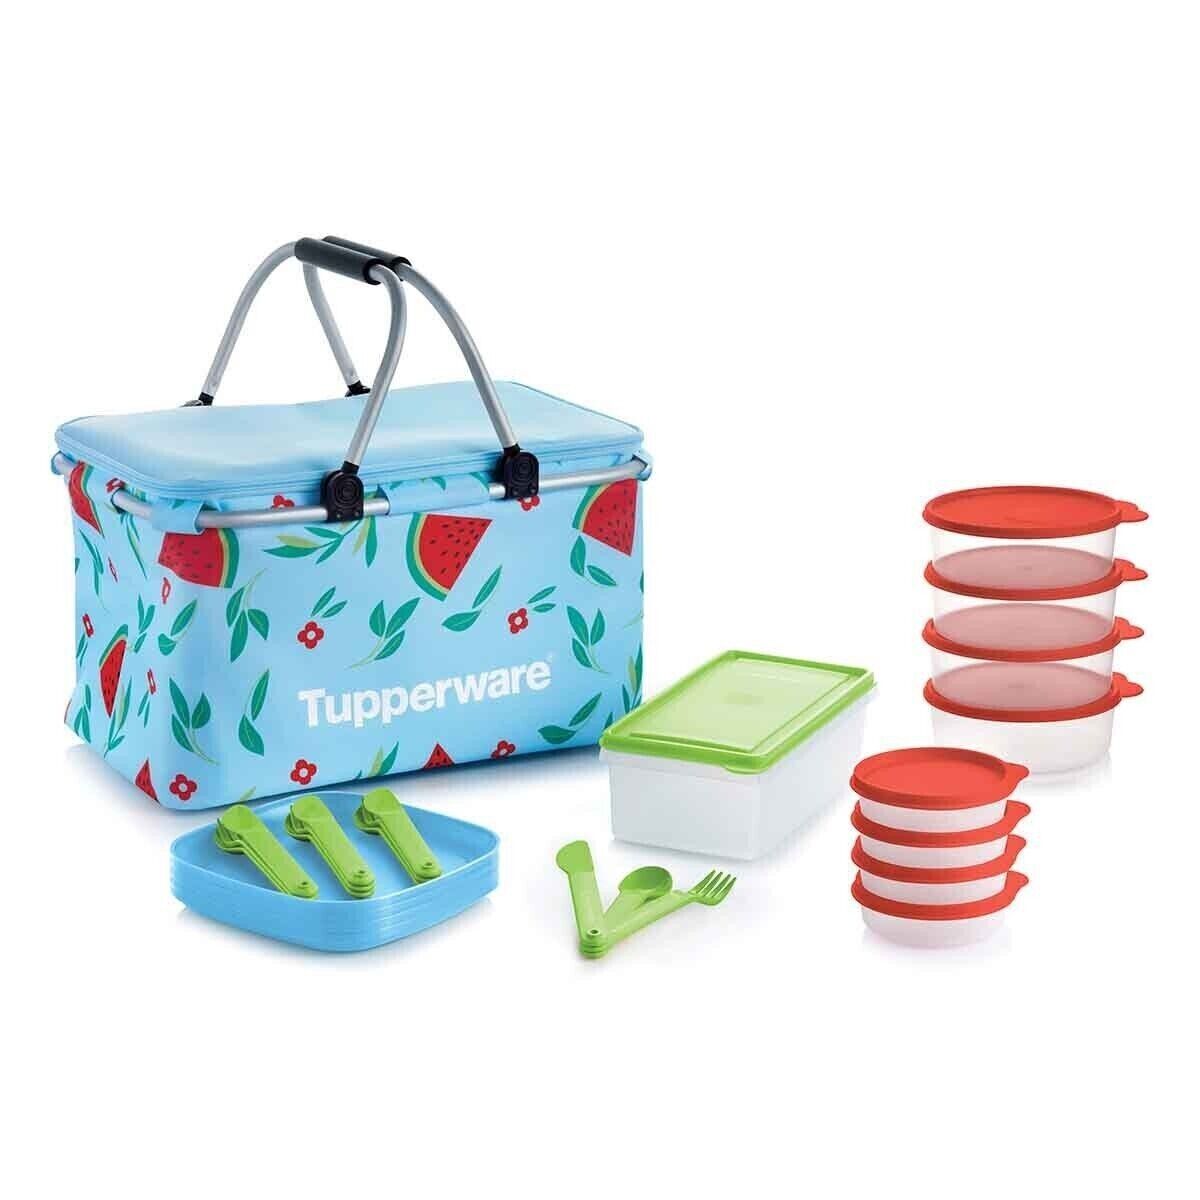 NEW Tupperware Host Collection Summer Picnic lunch Basket Set 